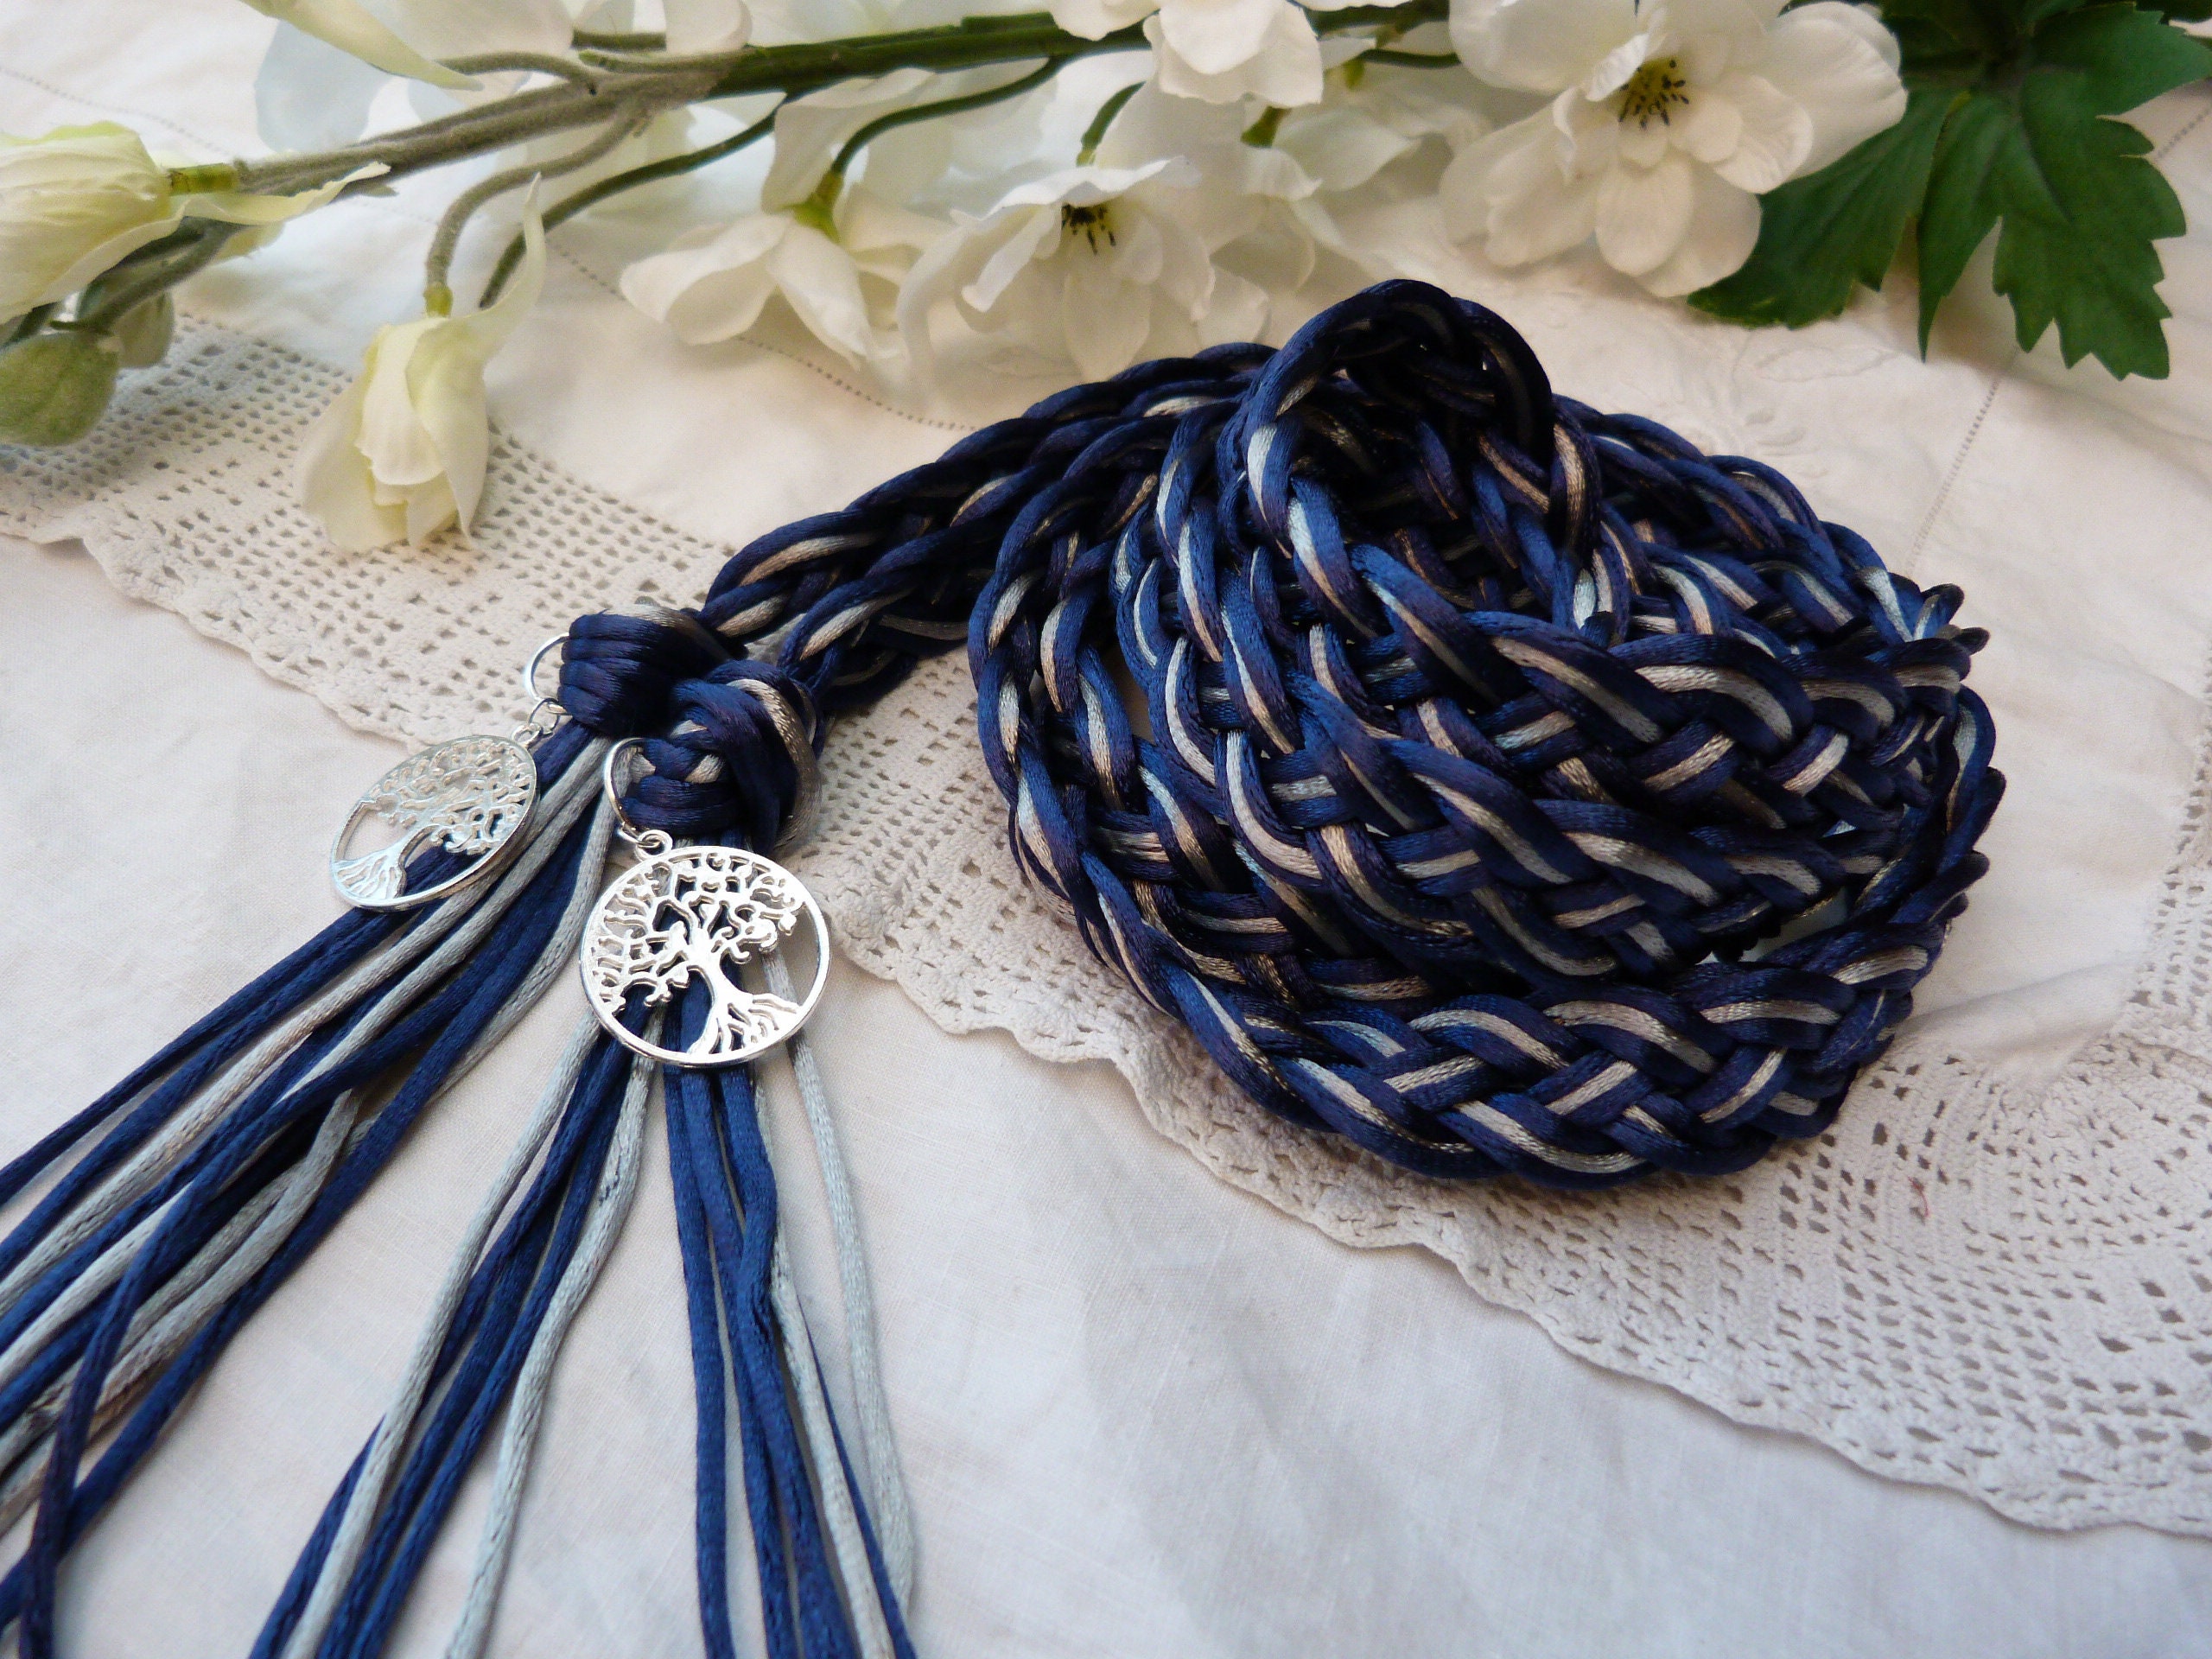 Natural Ivory Celtic Braided Handfasting Cord 100% Recycled Cotton